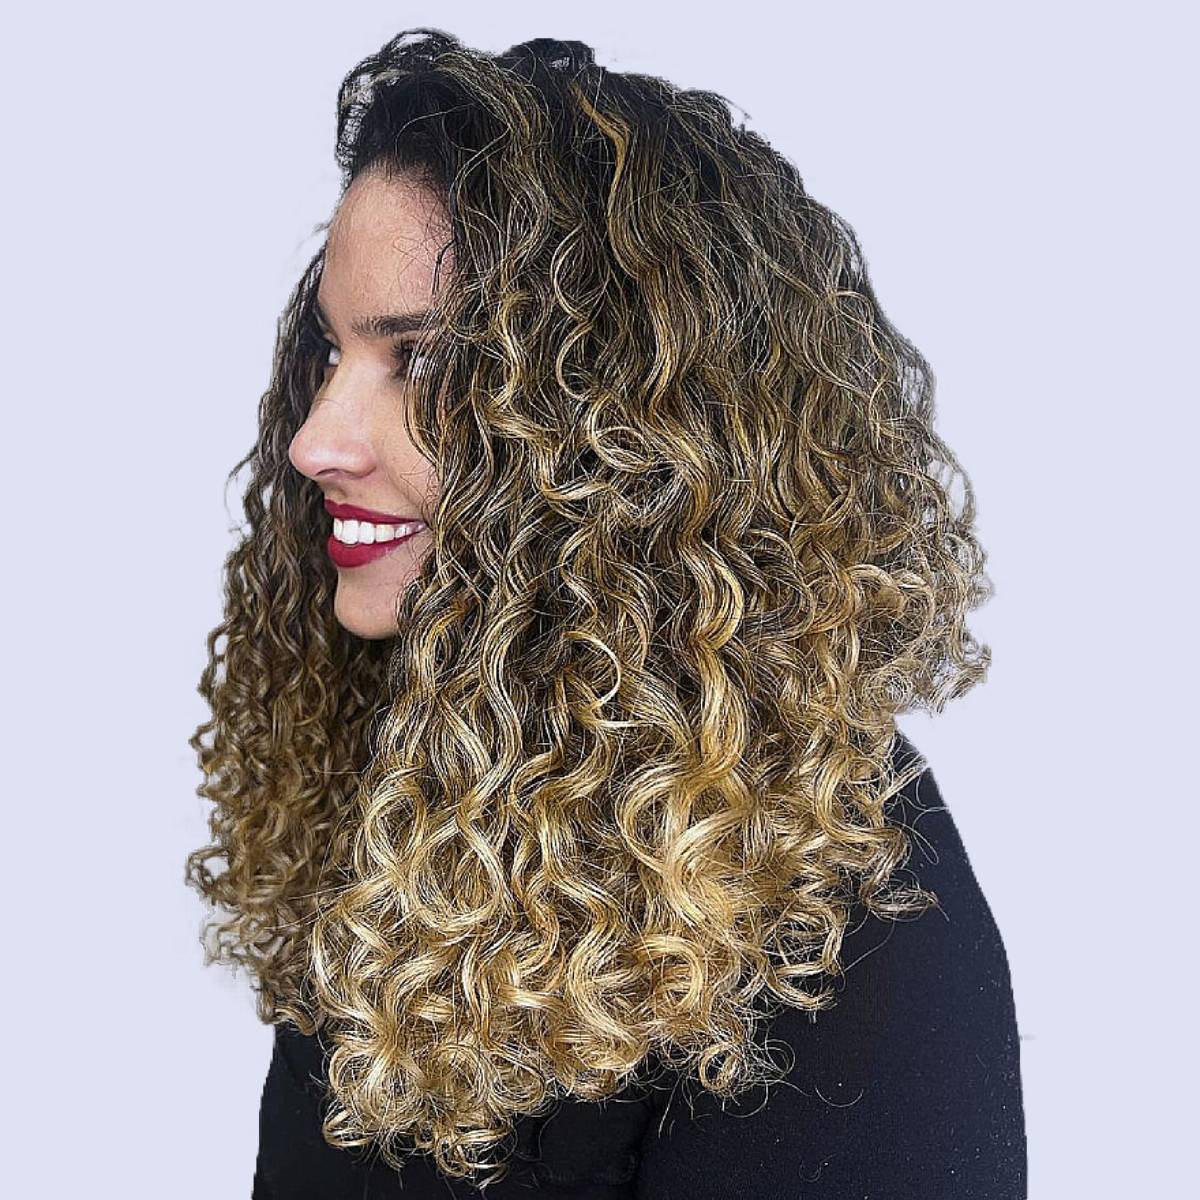 5 Stunning Ways to Rock Curly Hair Caramel Highlights That Will Make ...